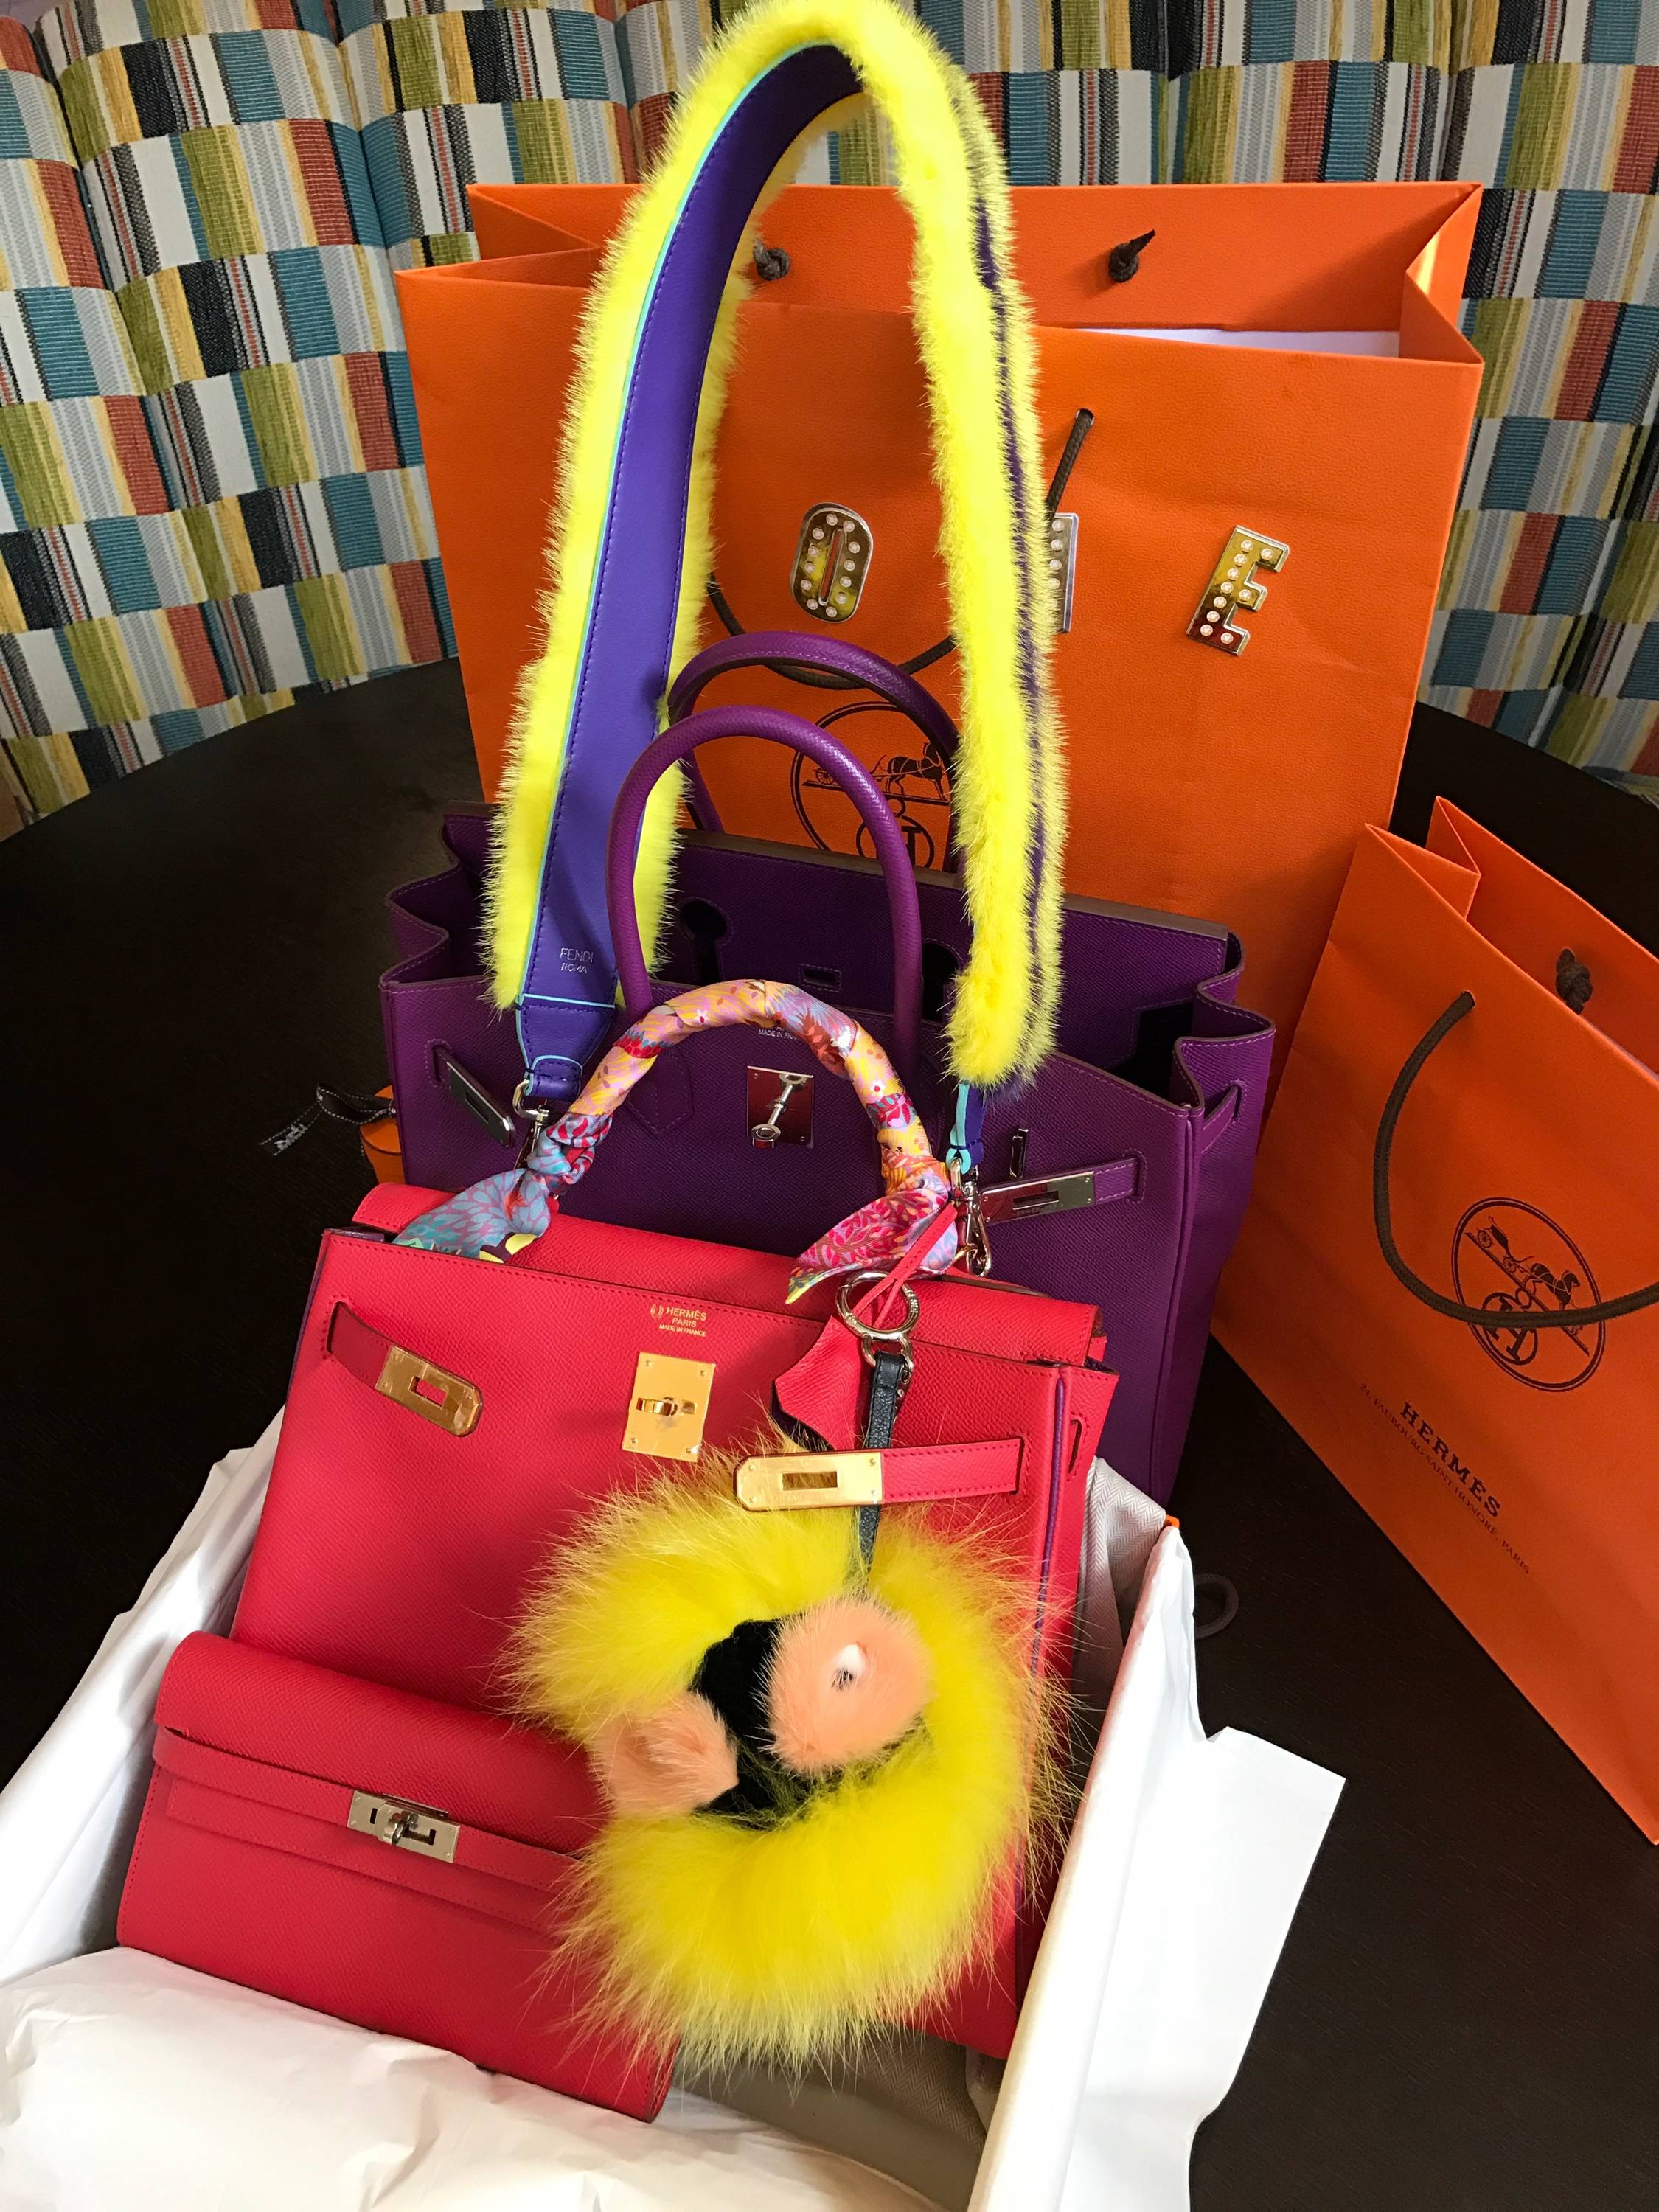 Hermès Kellys We Spotted in Action on Rodeo Drive - PurseBop